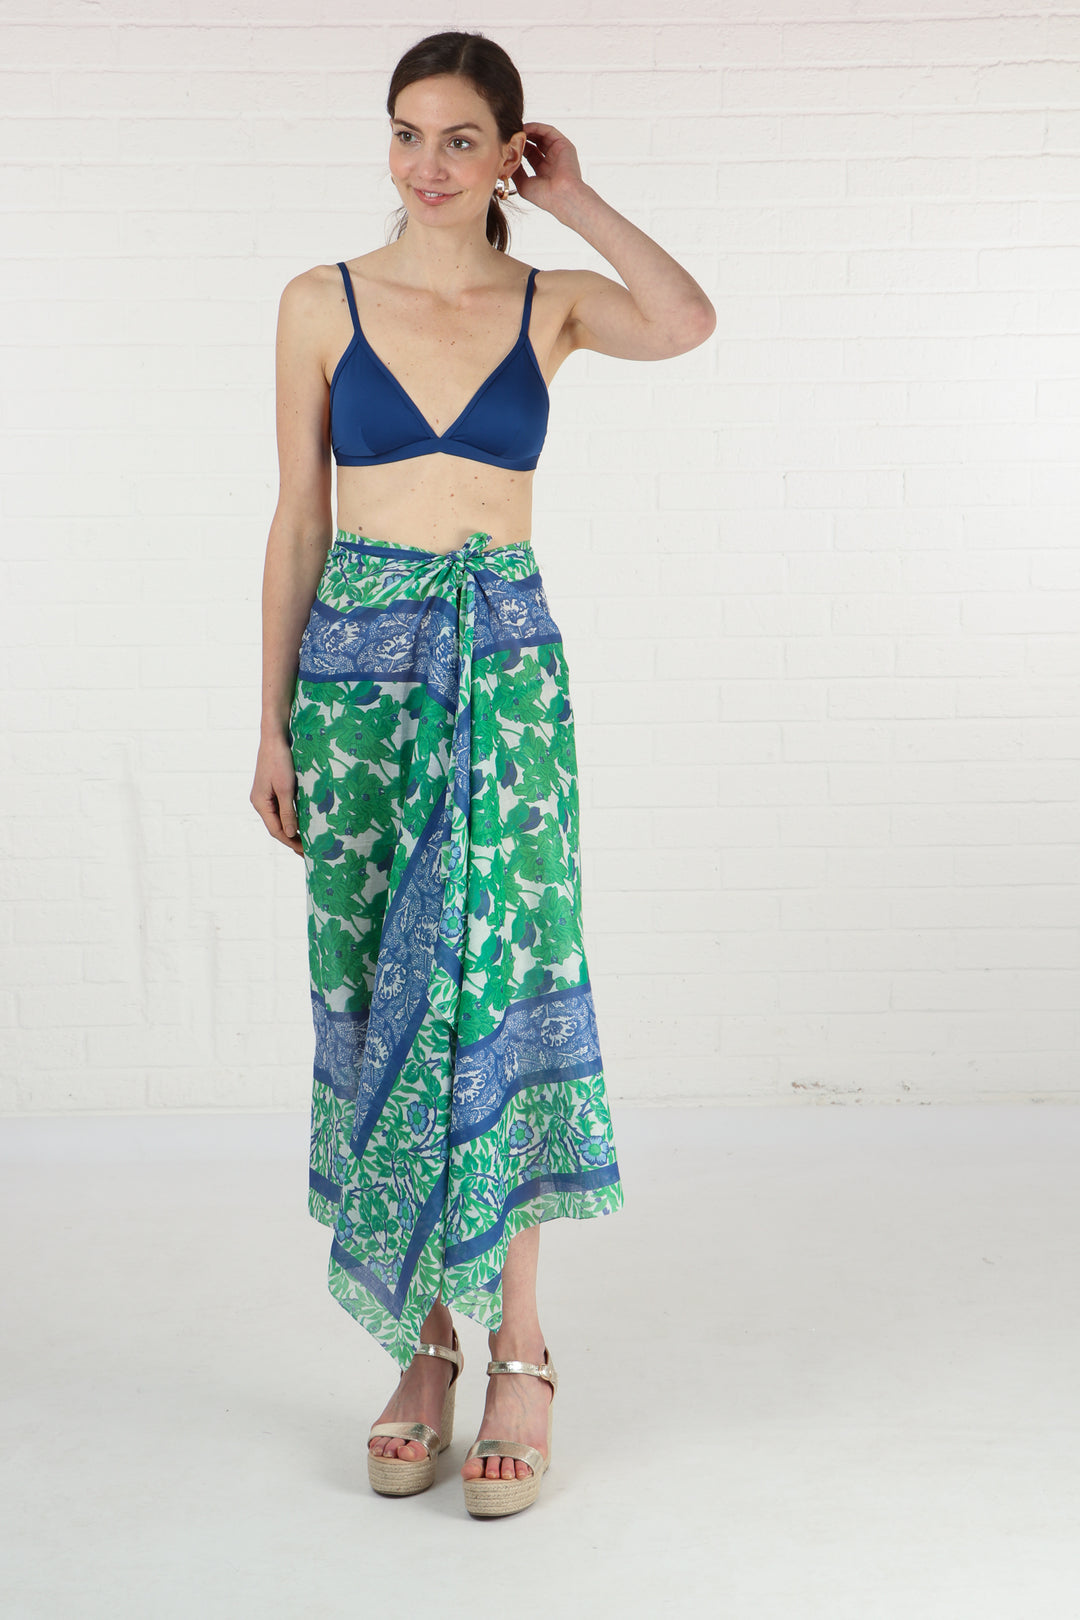 model wearing a green and blue floral print scarf as a beach sarong